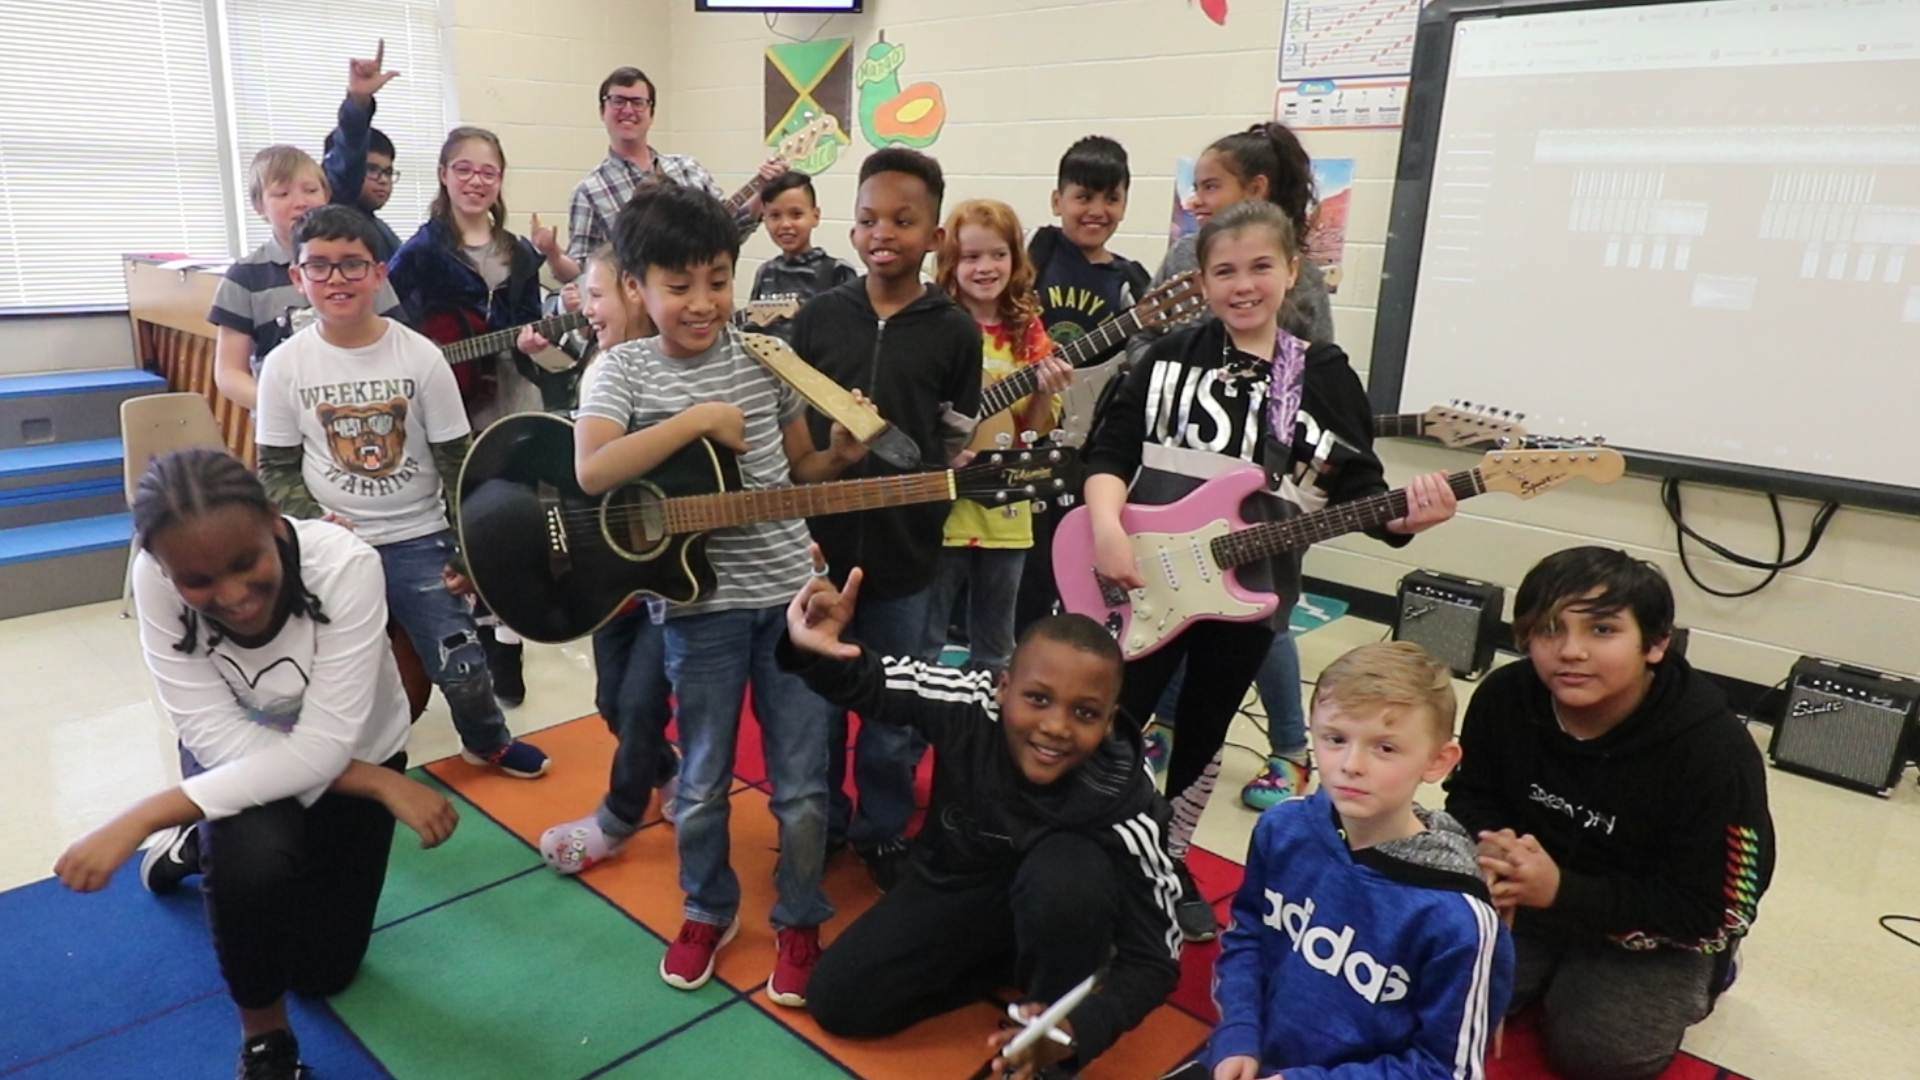 Thanks to a grant from the Union County Education Foundation, Sardis Elementary School students are jamming out in a rock band with their music teacher.